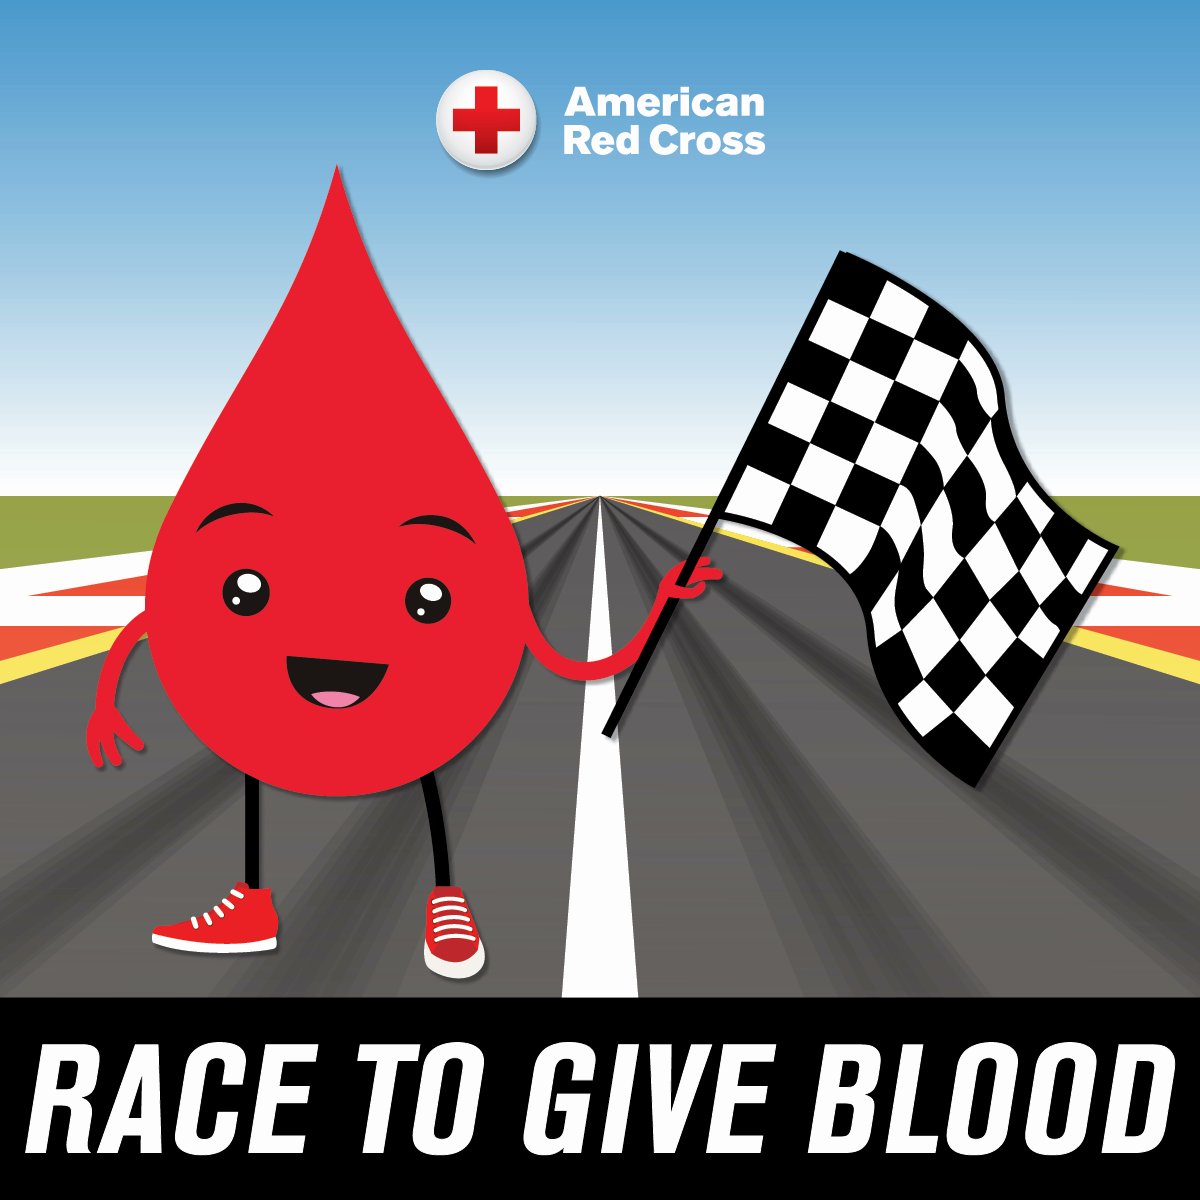 🏁Come to give blood or platelets 4/29-5/19 for a BONUS $10 e-gift card of choice PLUS a chance at a 2024 VIP NASCAR racing experience. And all who come give now-5/31 get a free haircut coupon by email from @SportClips! Race to give: rcblood.org/3ASKtL0 (T&C; other entry)